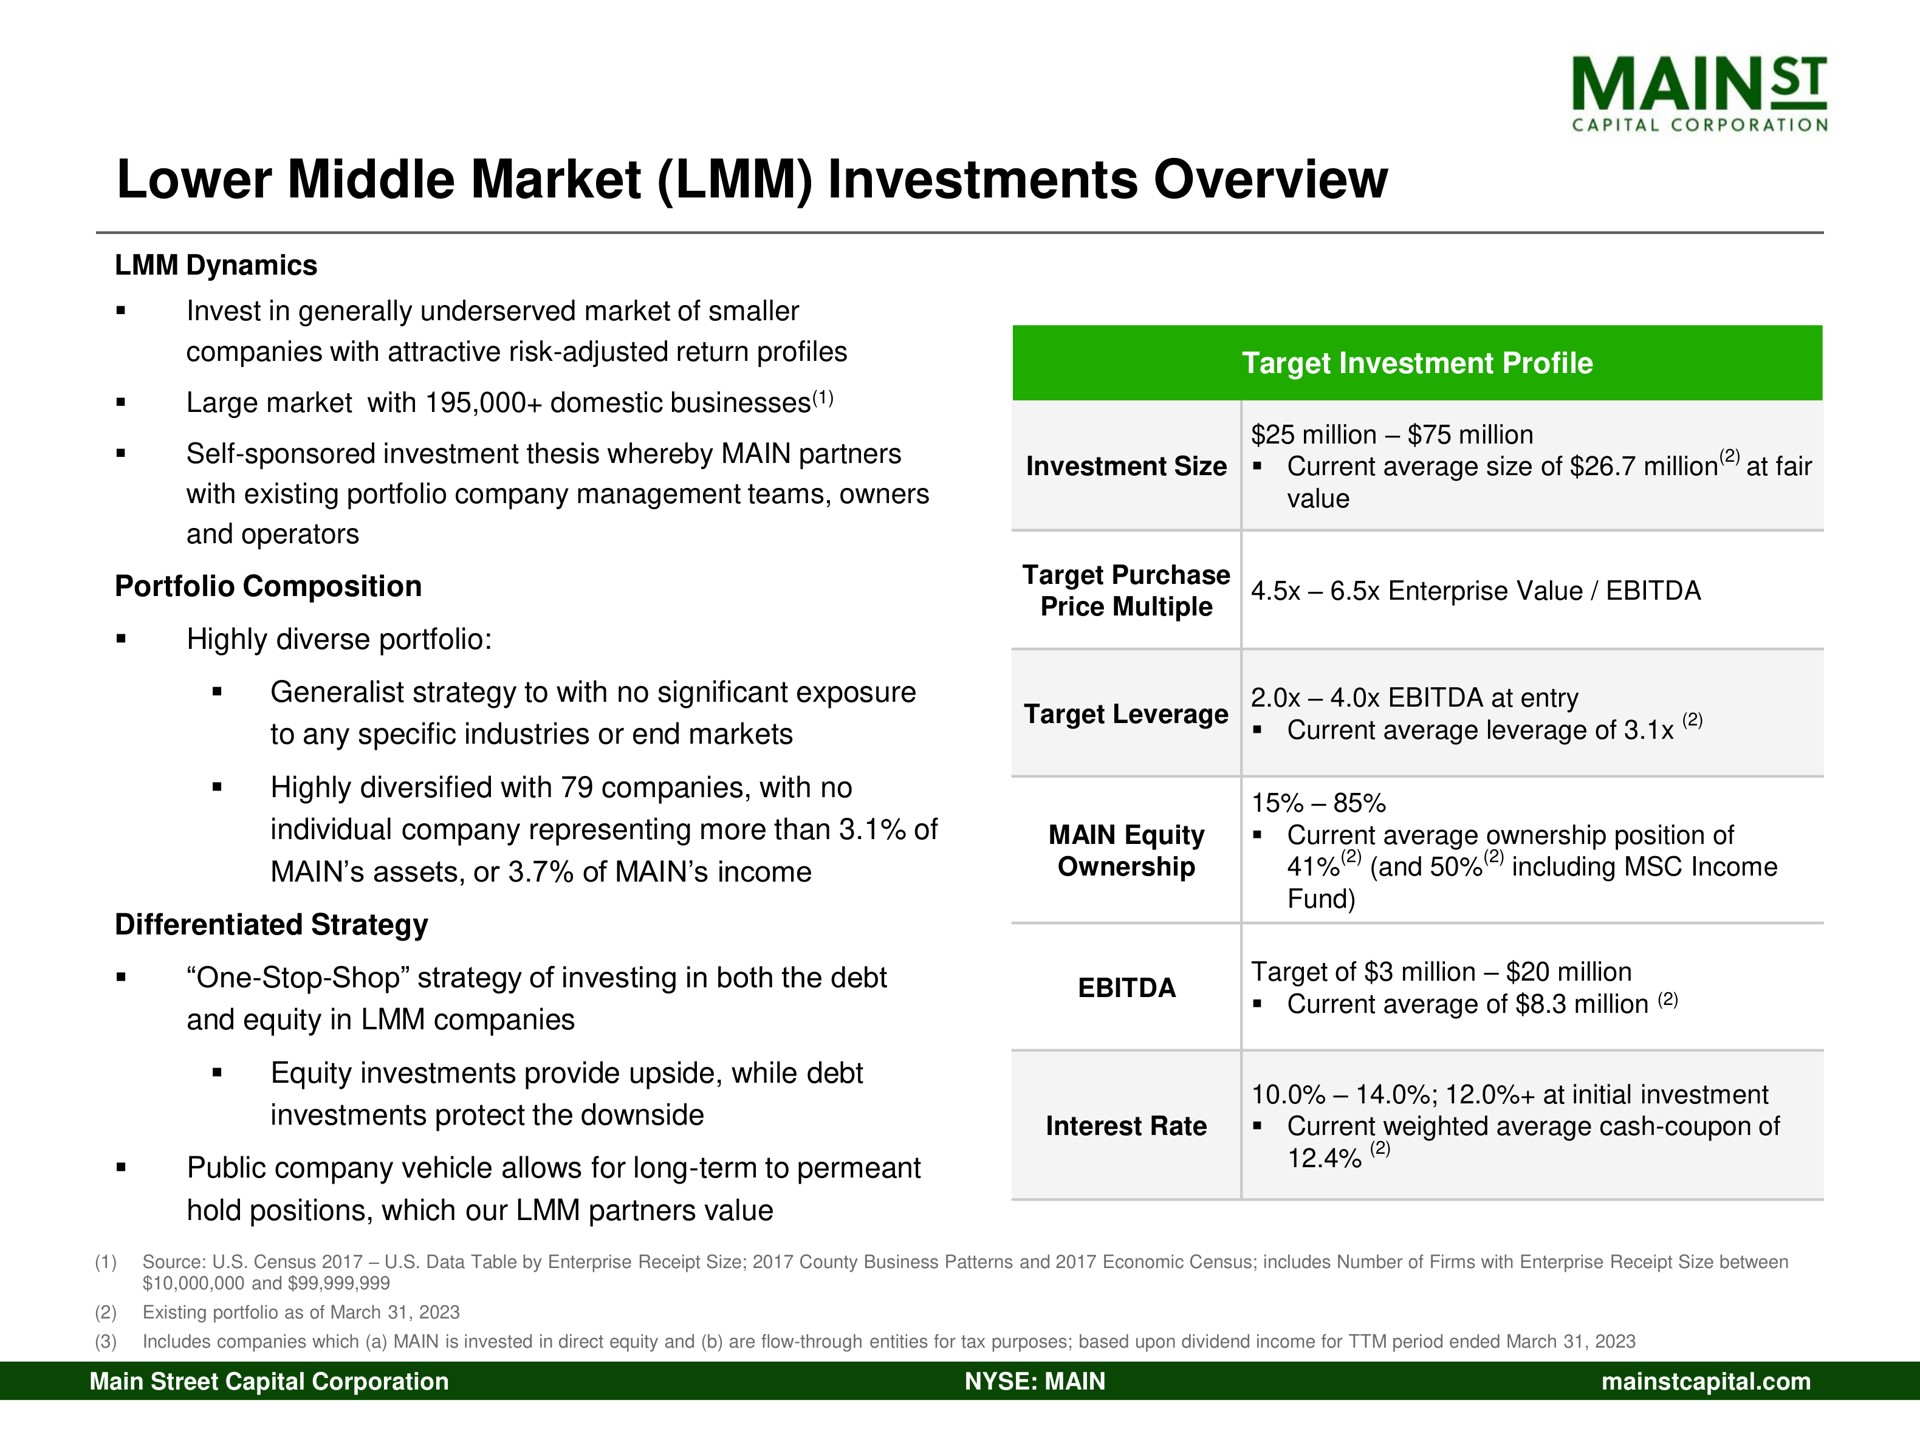 lower middle market investments overview | Main Street Capital